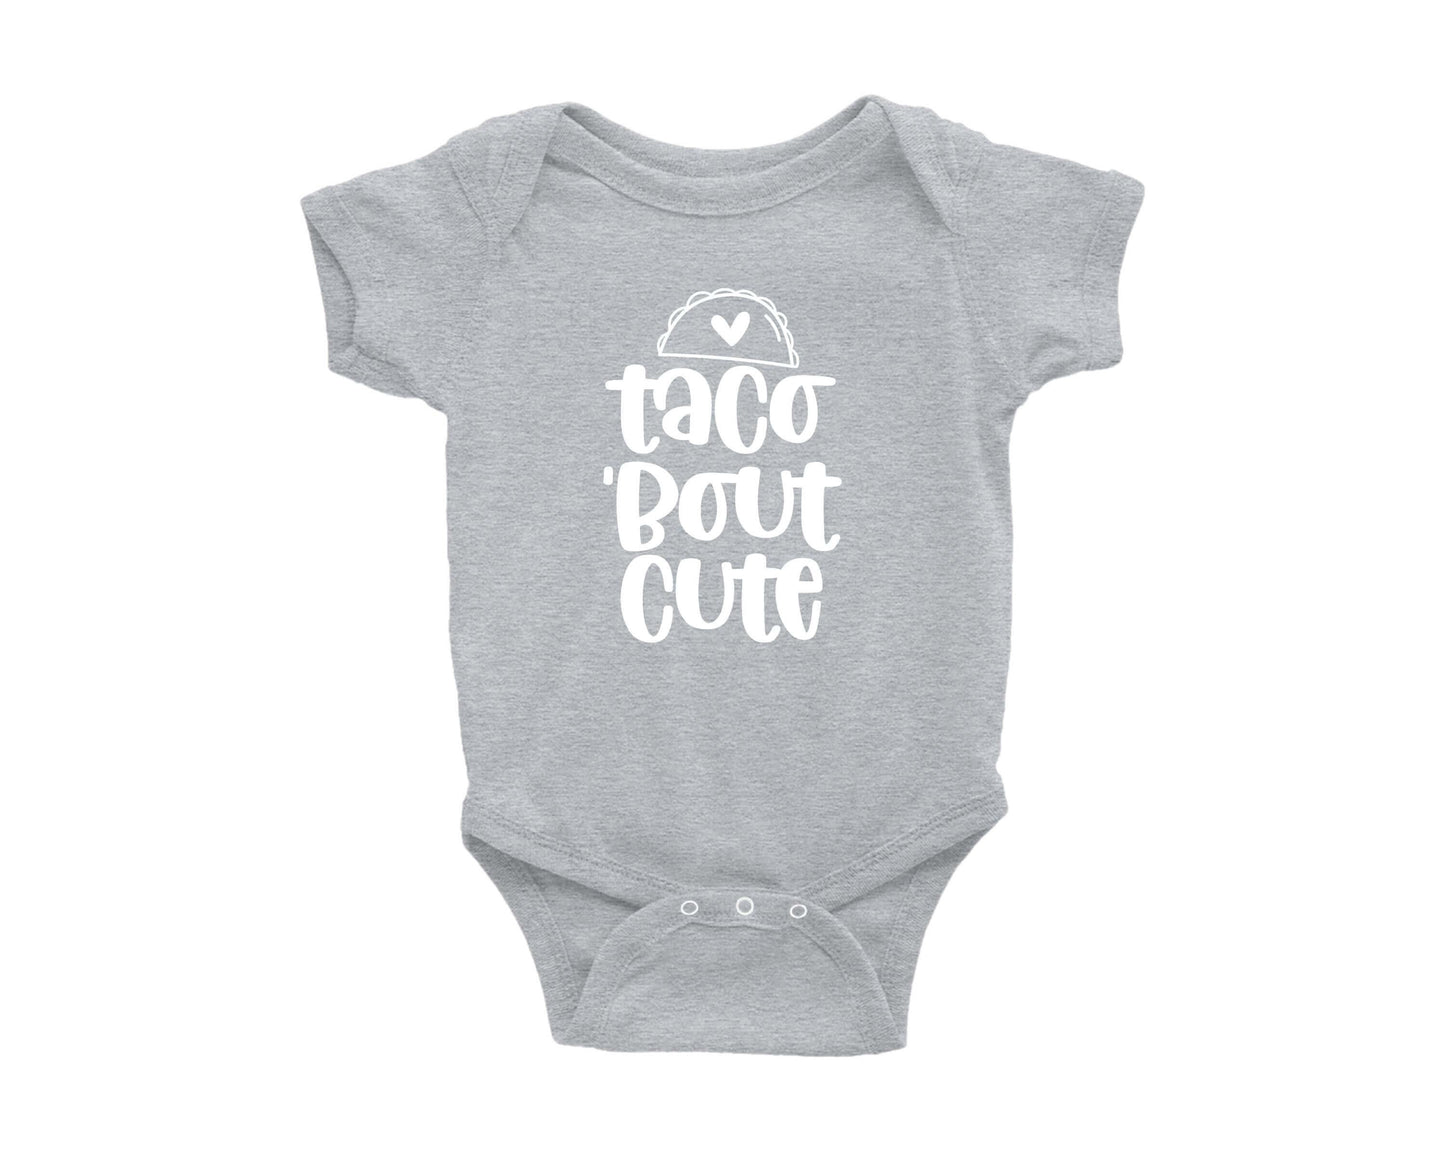 Taco 'Bout Cute Onesie - Crystal Rose Design Co.